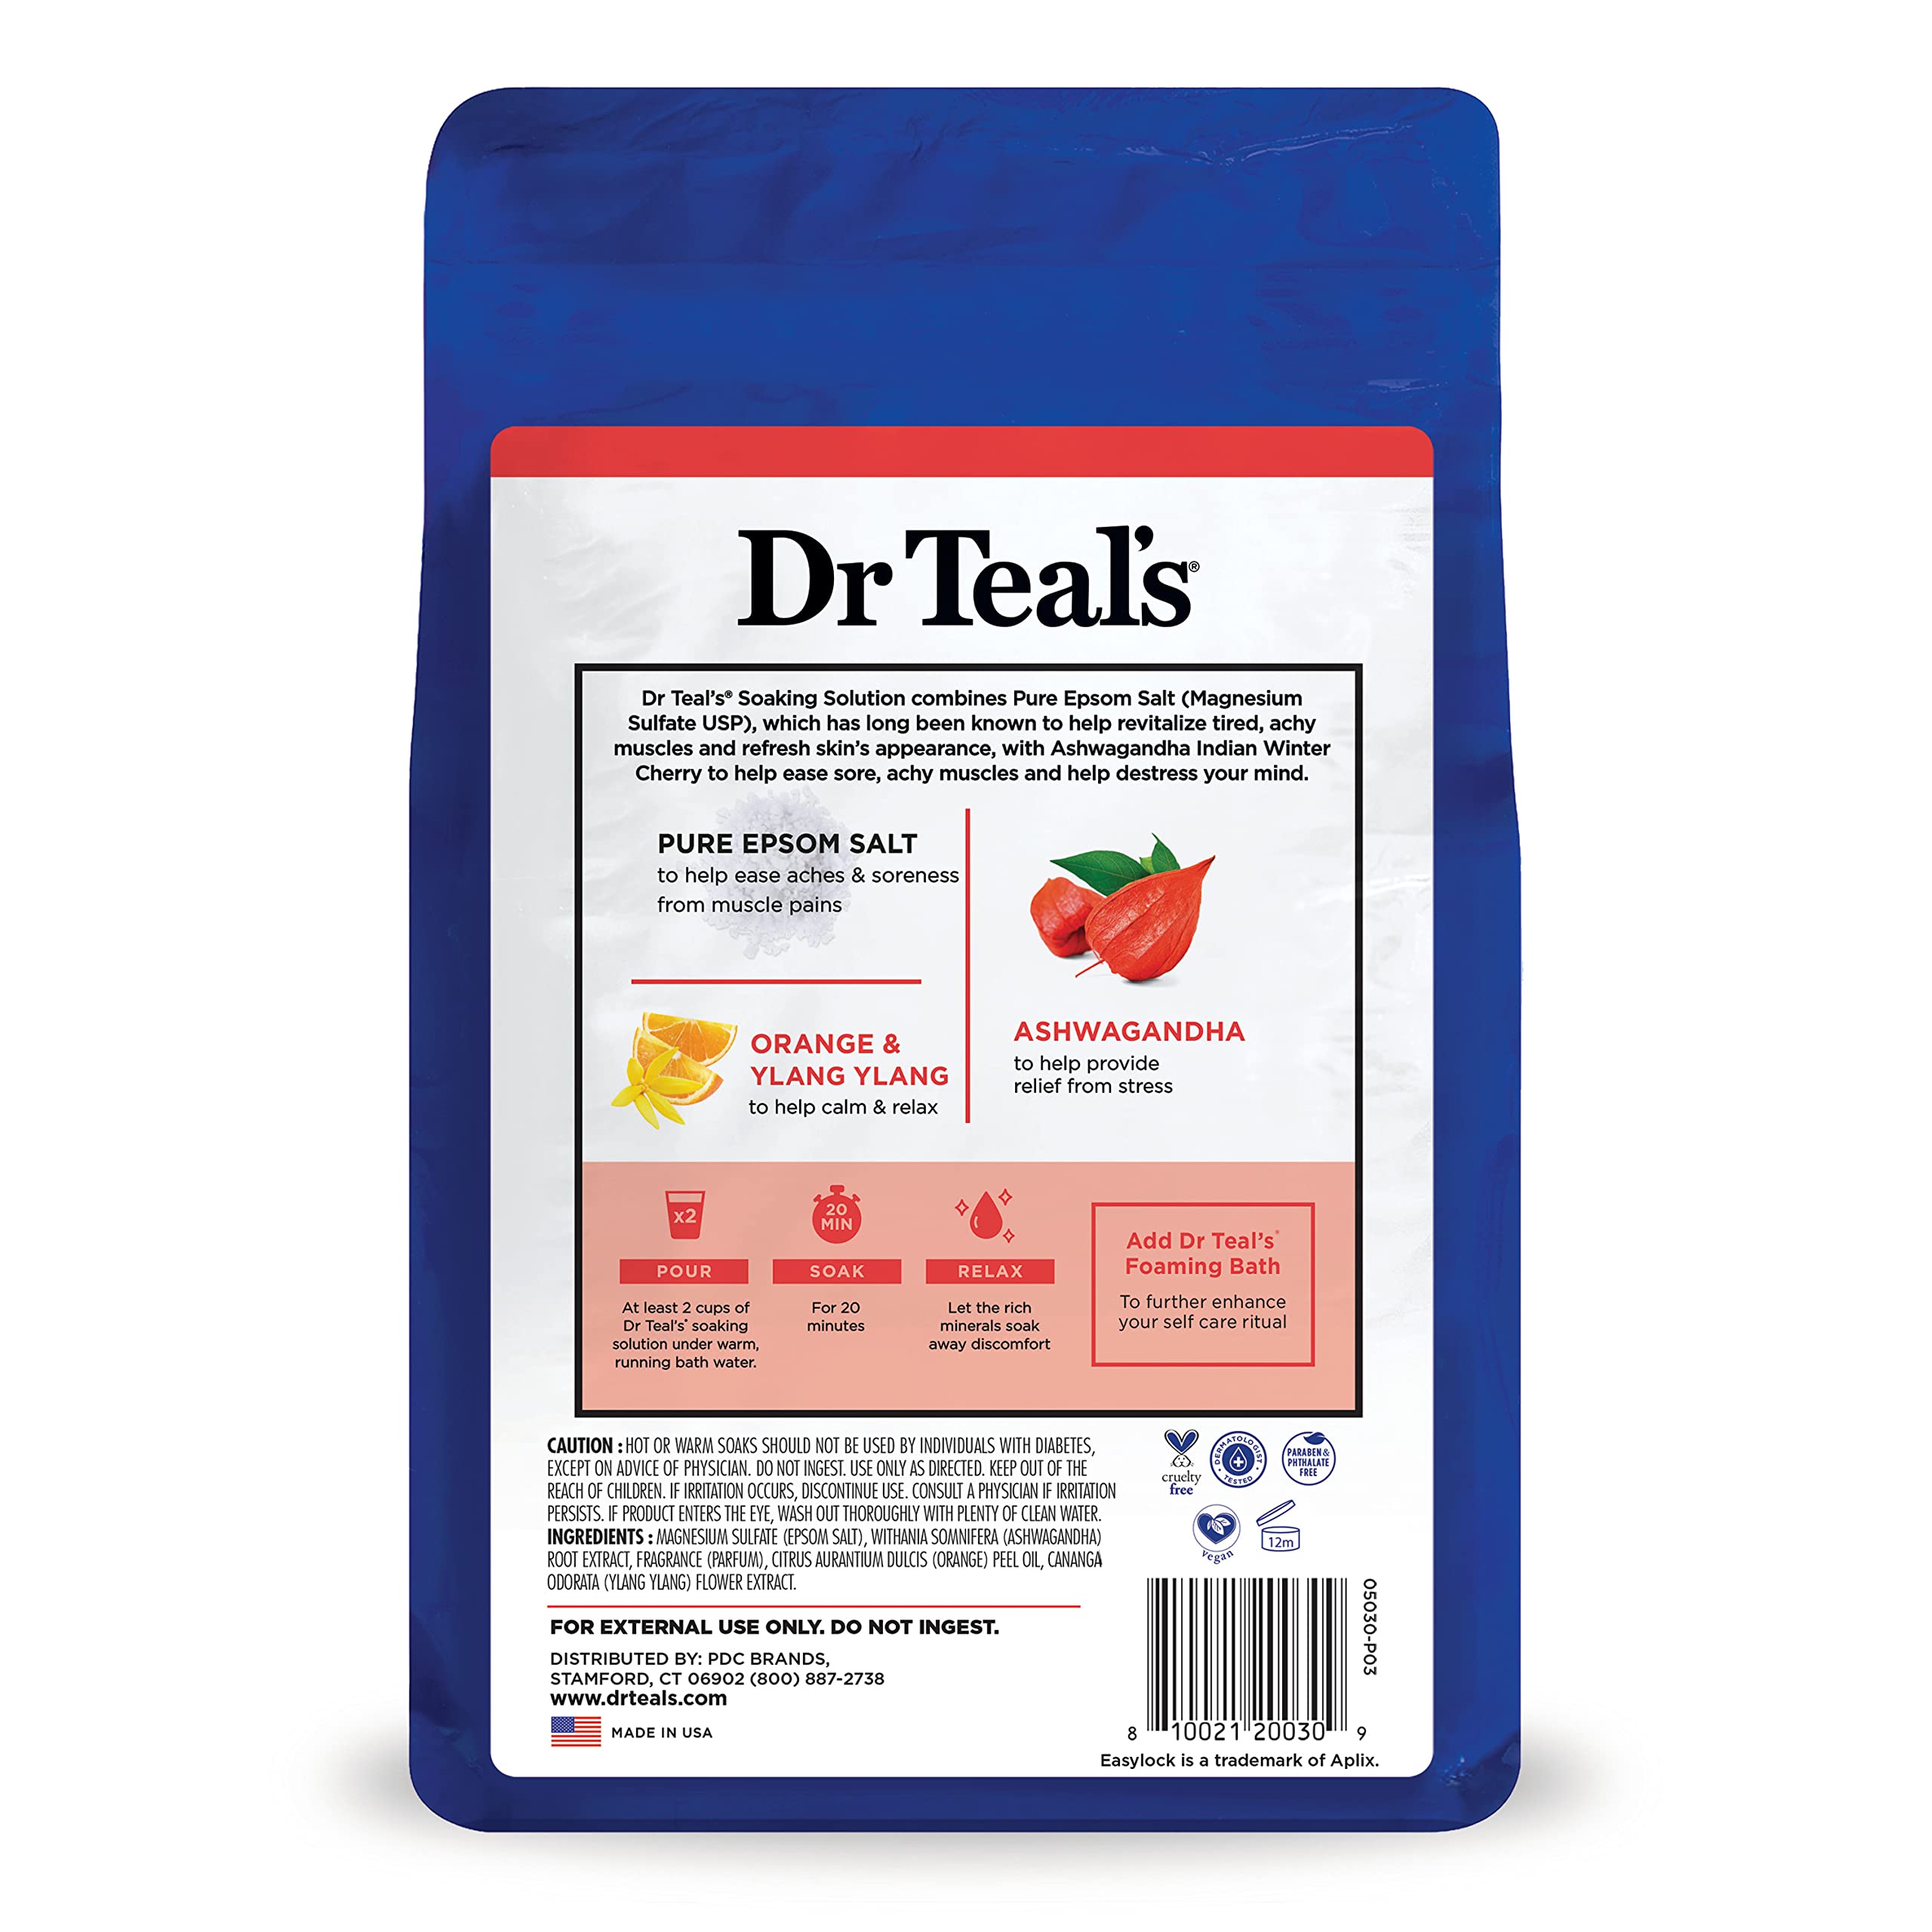 Dr Teal's Pure Epsom Salt, Ashwagandha & Essential Oils, 3 lbs (Pack of 4) (Packaging May Vary)